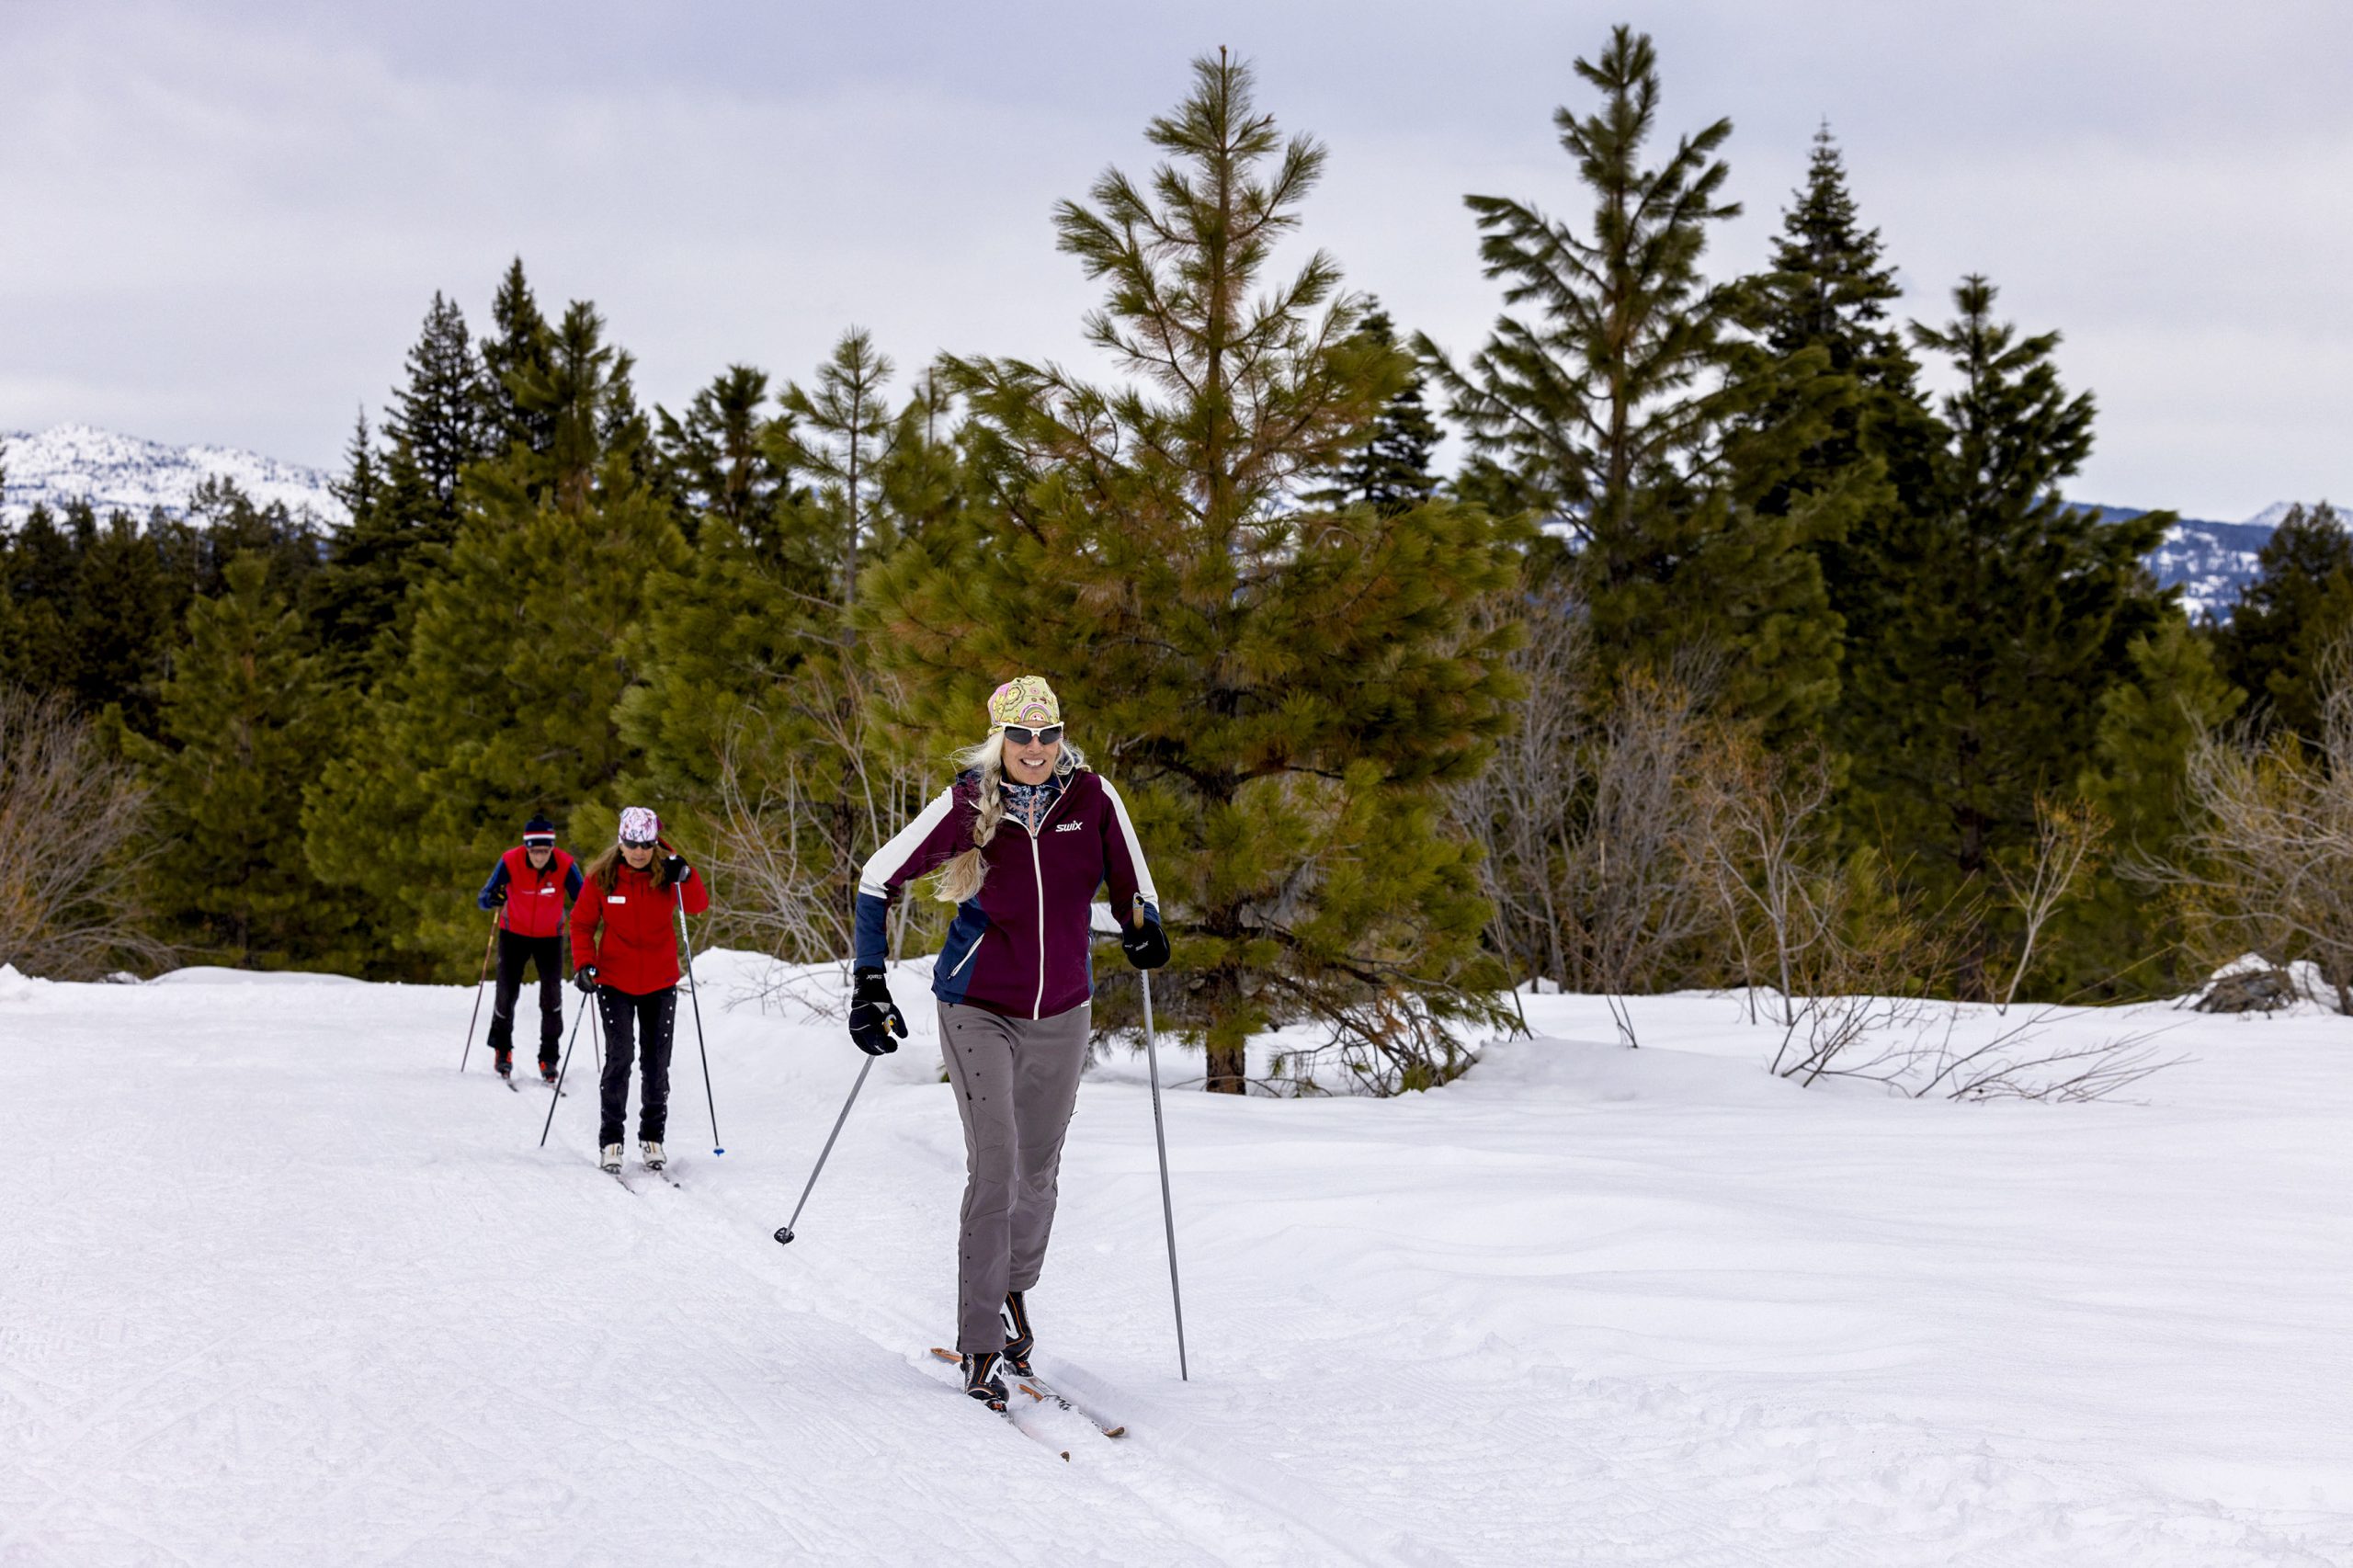 Learn Something New: Nordic Skiing - McCall Idaho, Let's Go!